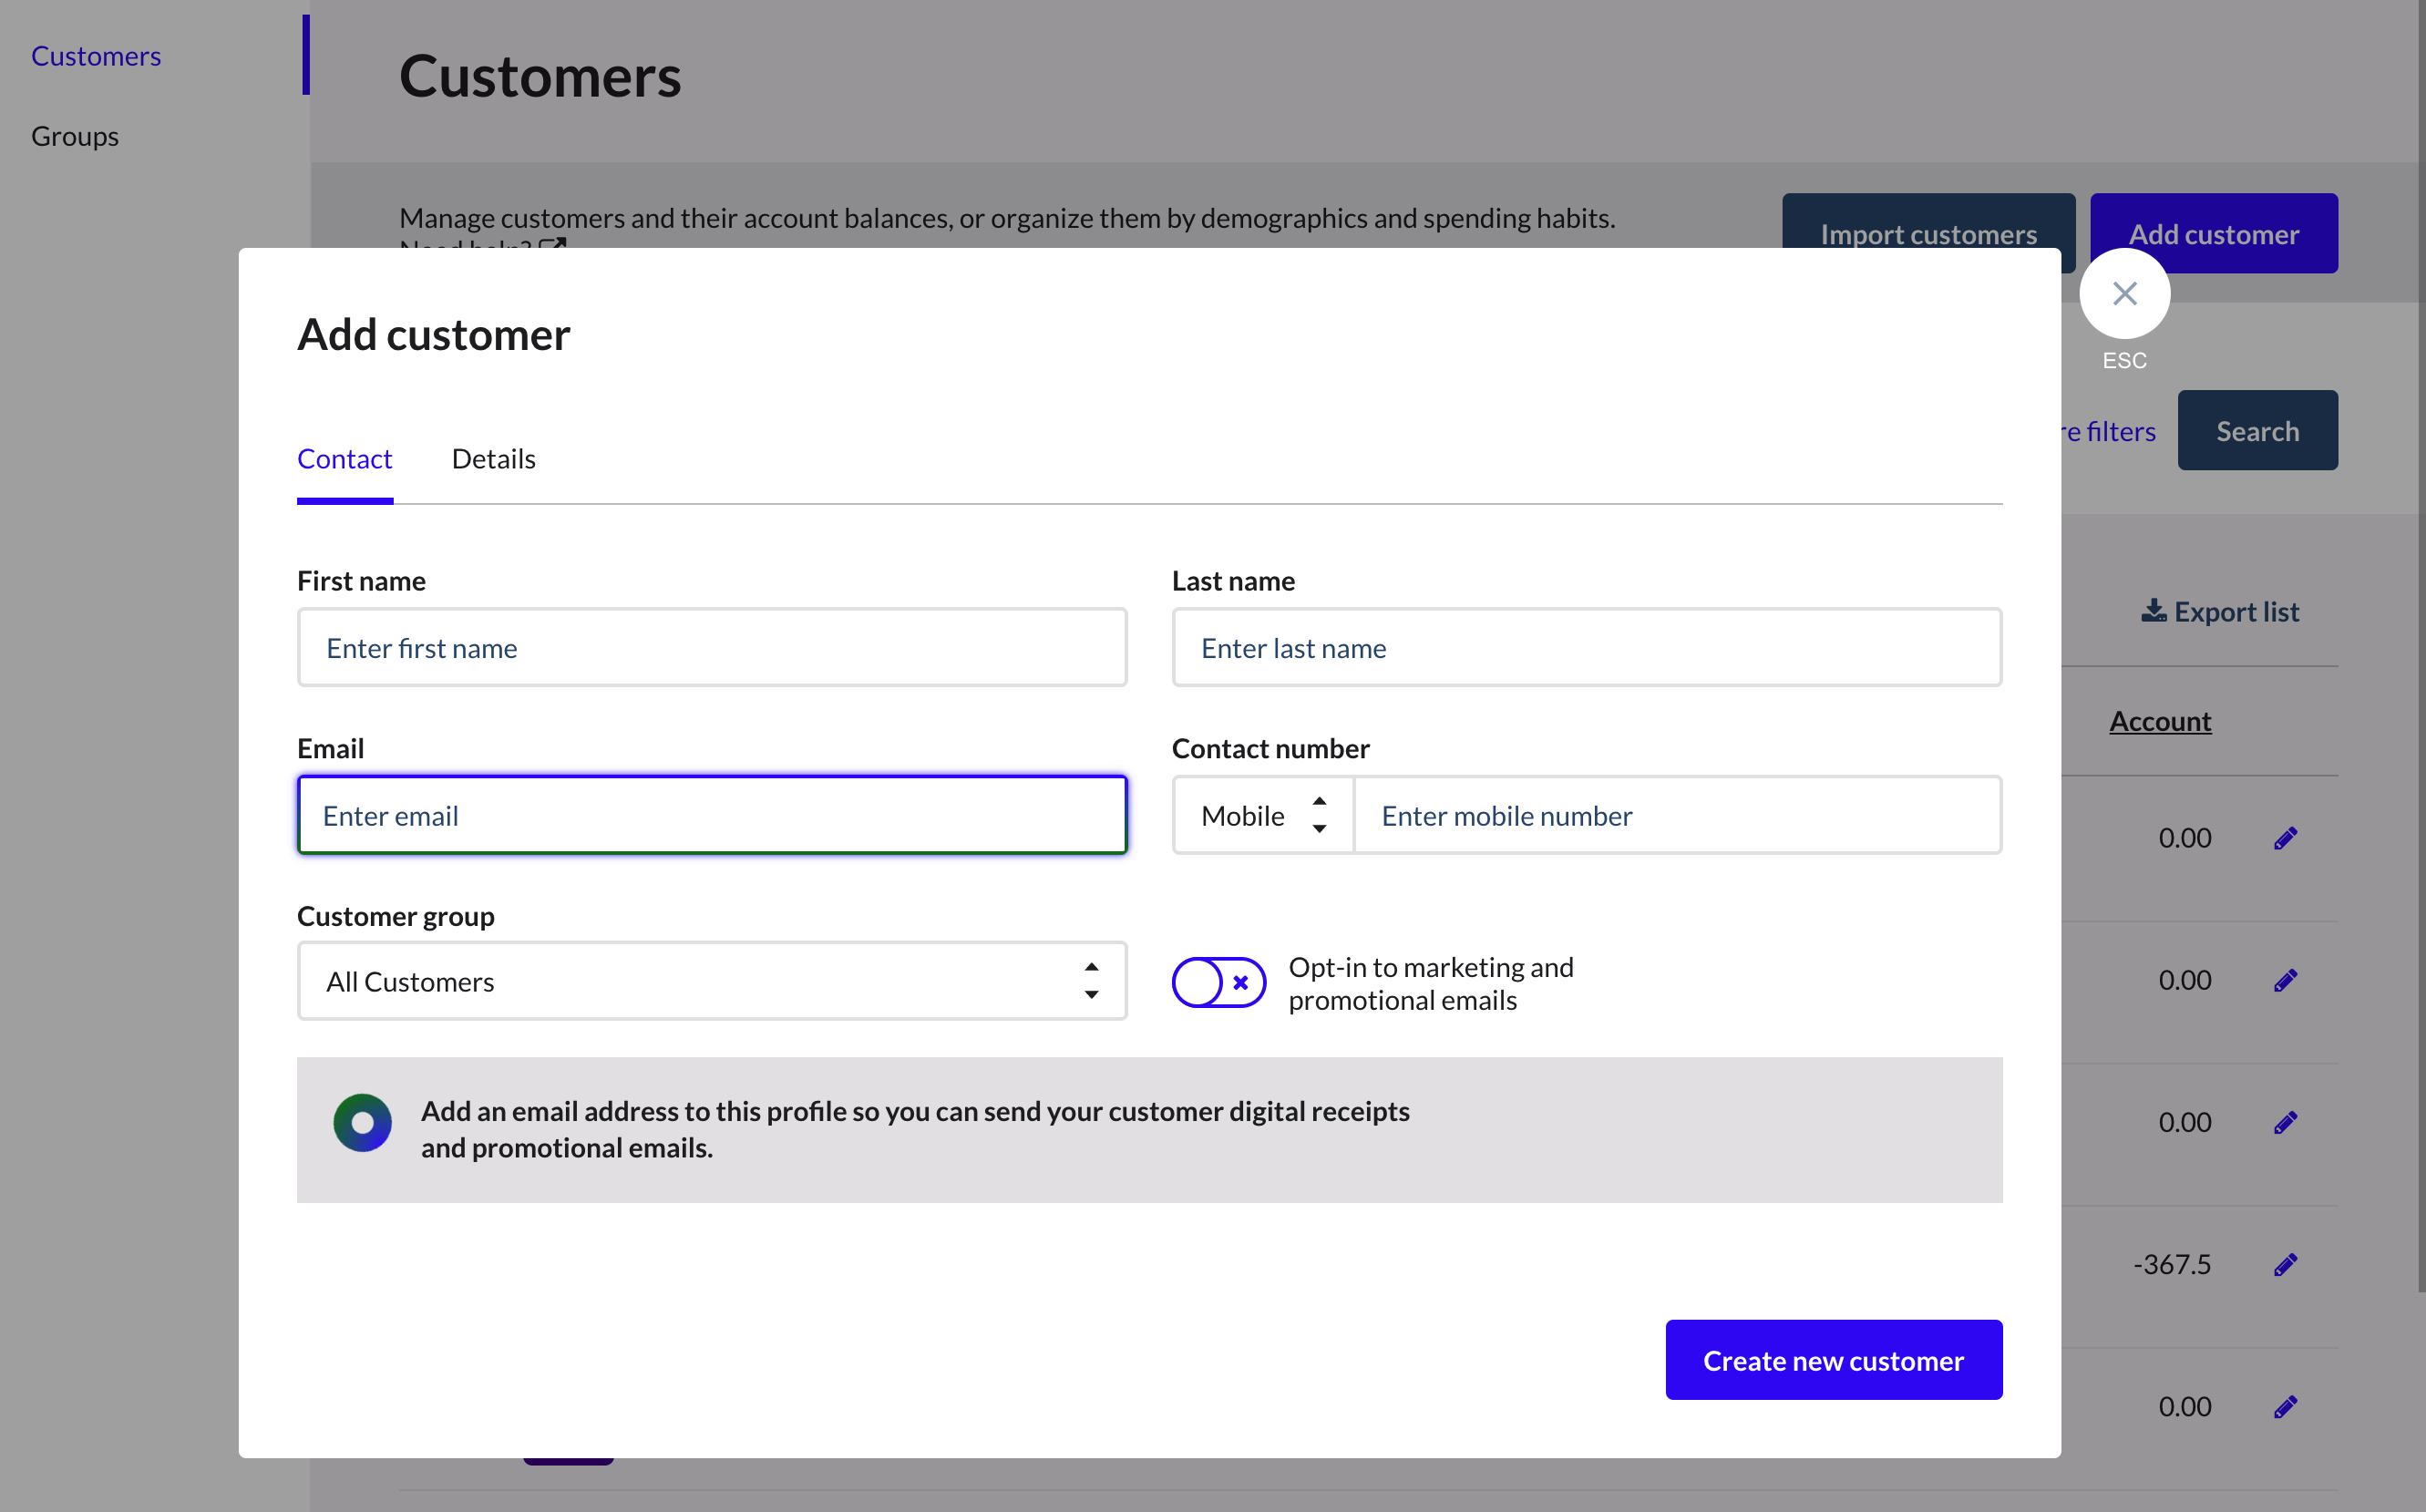 Add new customer dialogue box with fields for entering customer information.